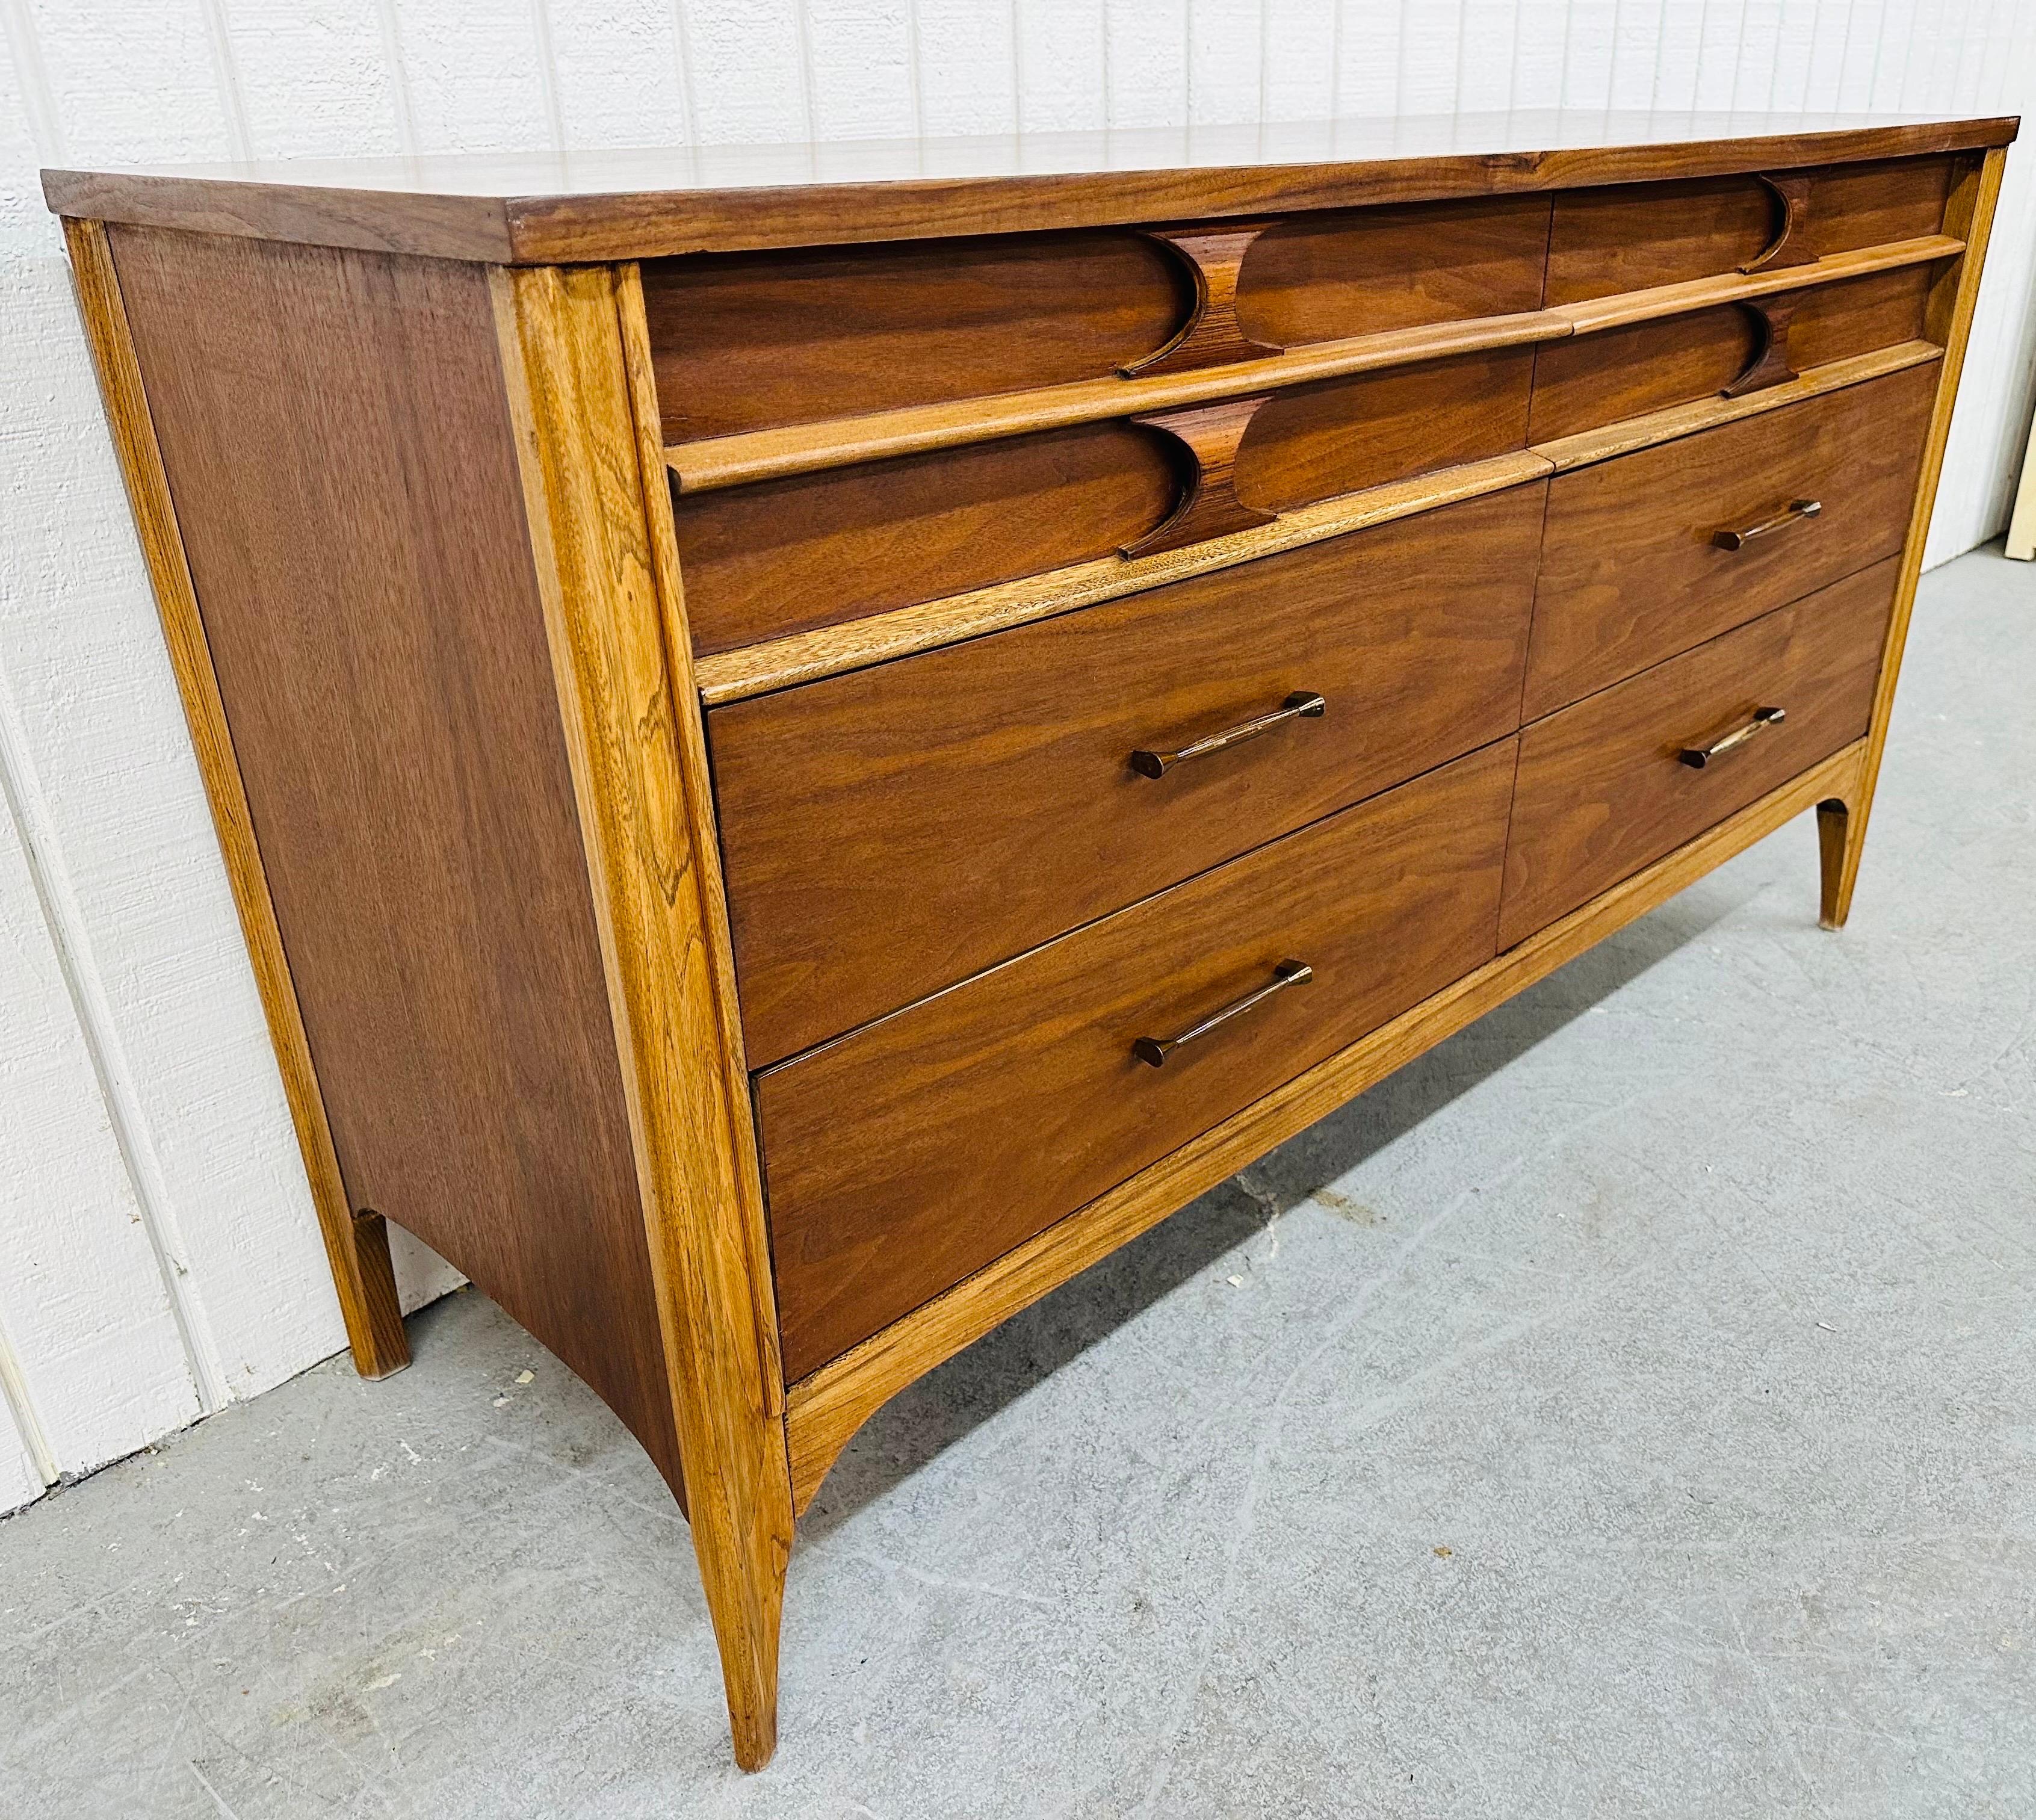 This listing is for a Mid-Century Modern Kent Coffey Perspecta Walnut Double Dresser. Featuring a straight line design, six drawers for storage, sculpted rosewood pulls at the top, original hardware on the bottom, modern legs, and a beautiful walnut